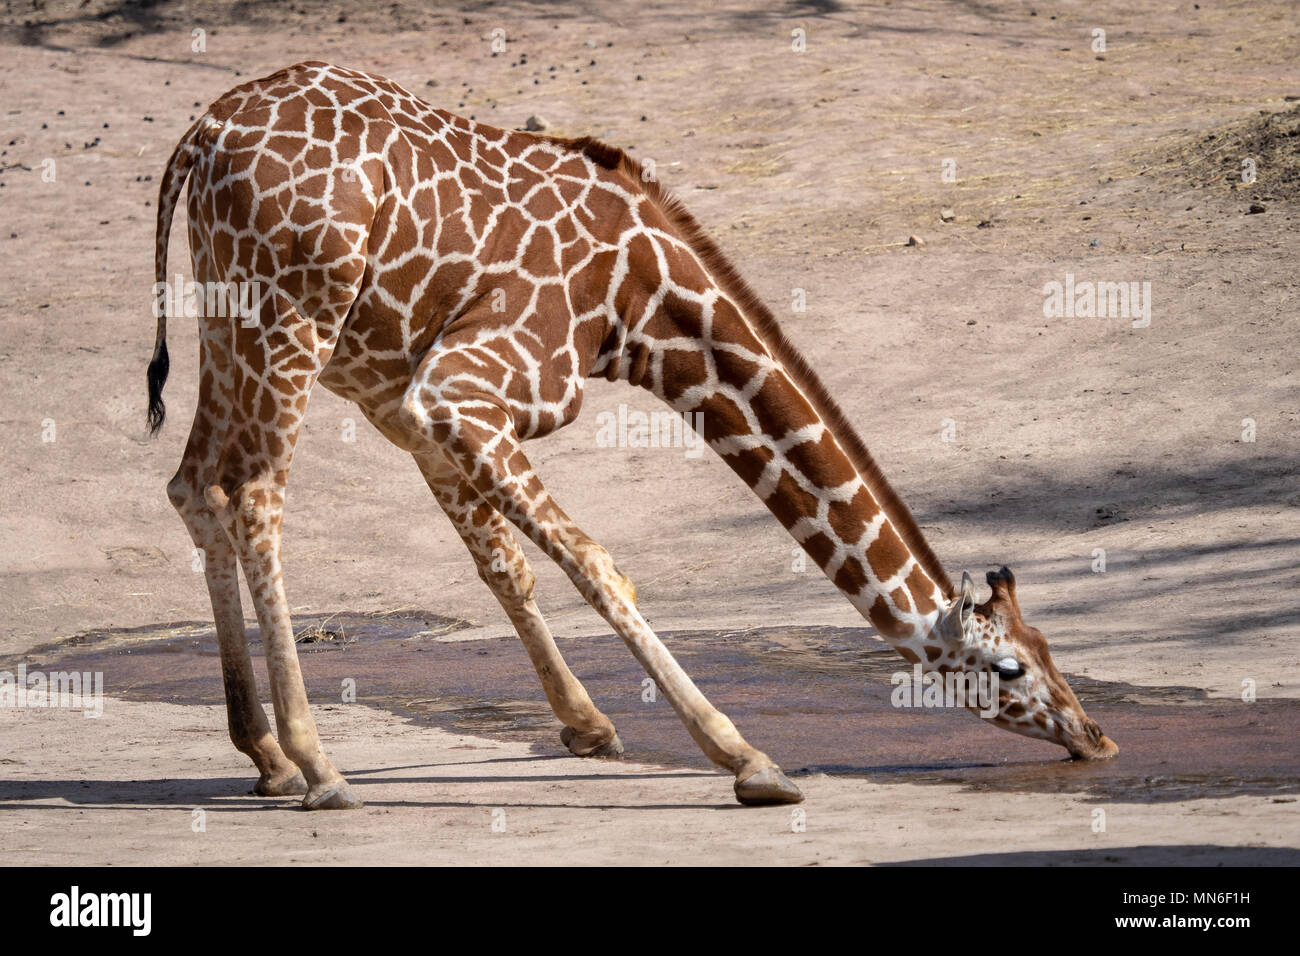 One giraffe drinking water in the dry landscape Stock Photo